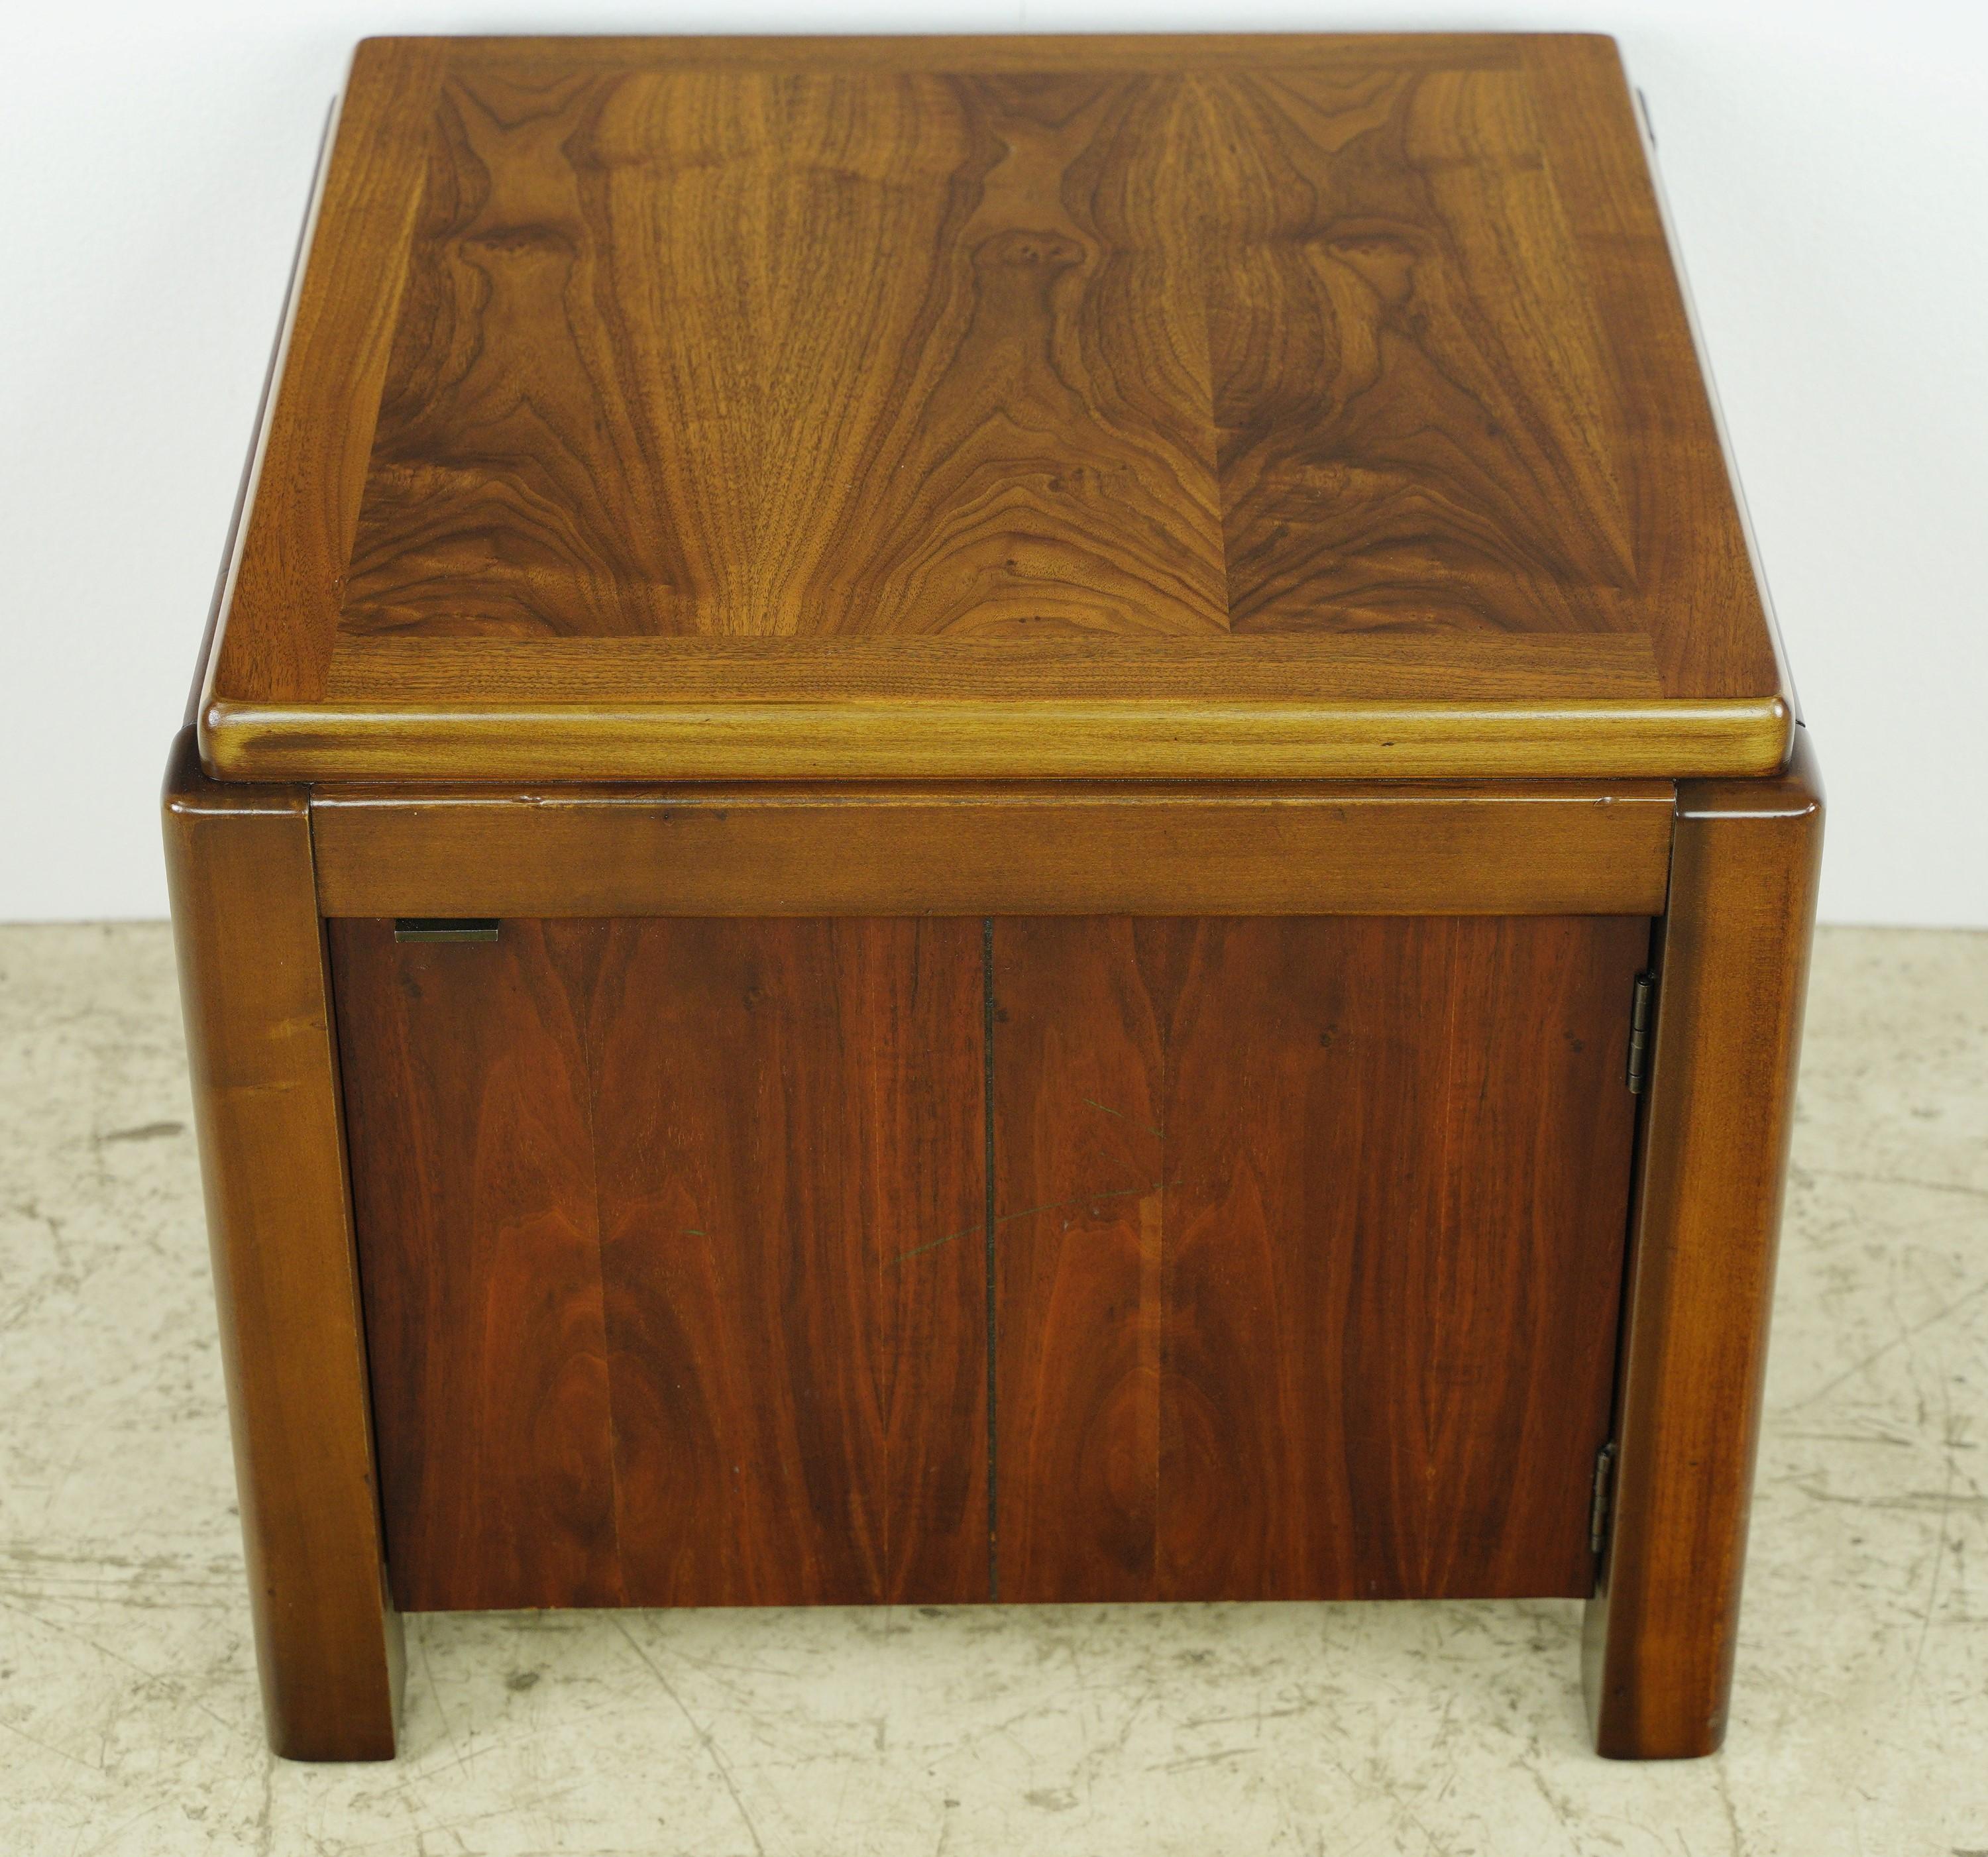 The Lane Furniture Company was founded in 1912 by John Lane in Altavista, Virginia, USA. Initially, it focused on manufacturing cedar chests. Over the years, it expanded its product line to include various types of furniture. 
This Lane end table is